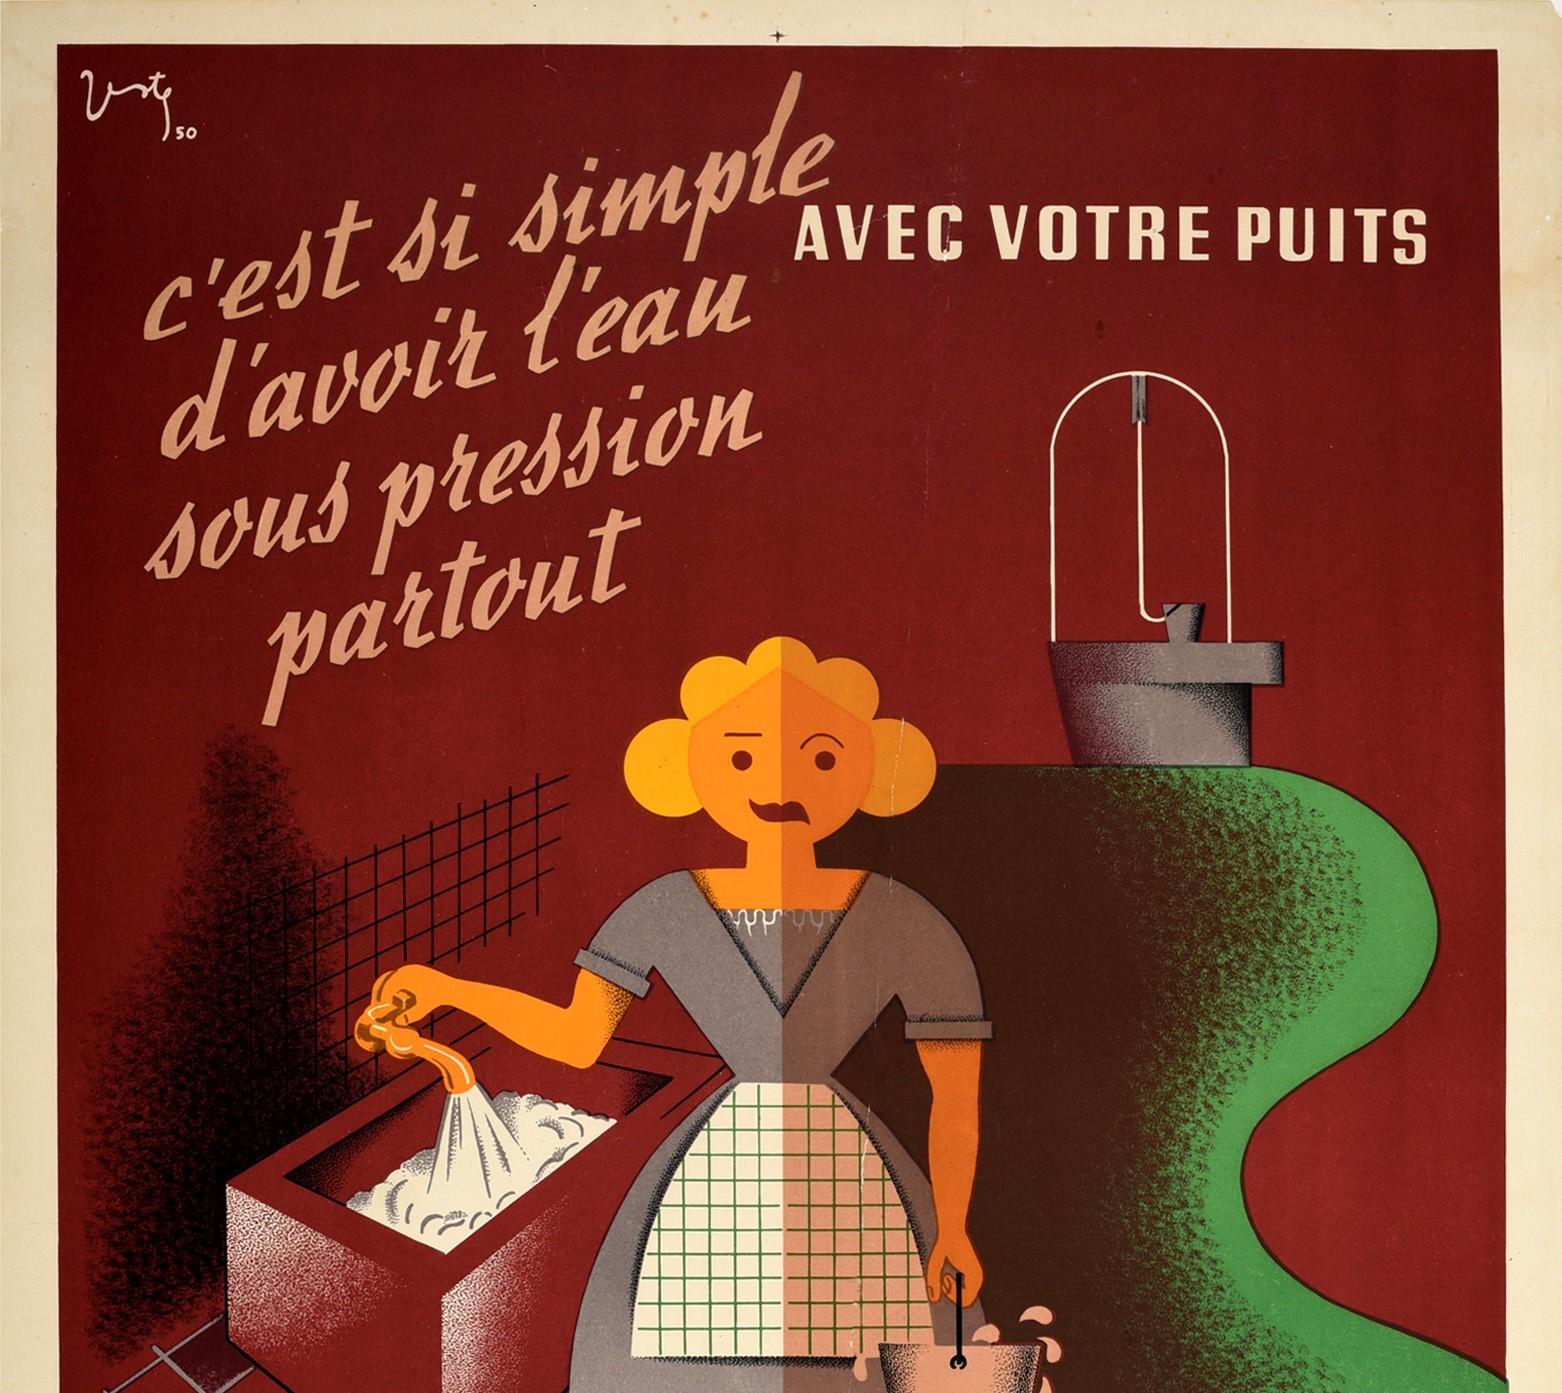 Original vintage advertising poster for Pompes Jeumont pumps - It's so easy to have pressurised water everywhere / C'est si simple d'avoir l'eau sous pression partout - featuring a colourful modernist design depicting a lady looking at the viewer,